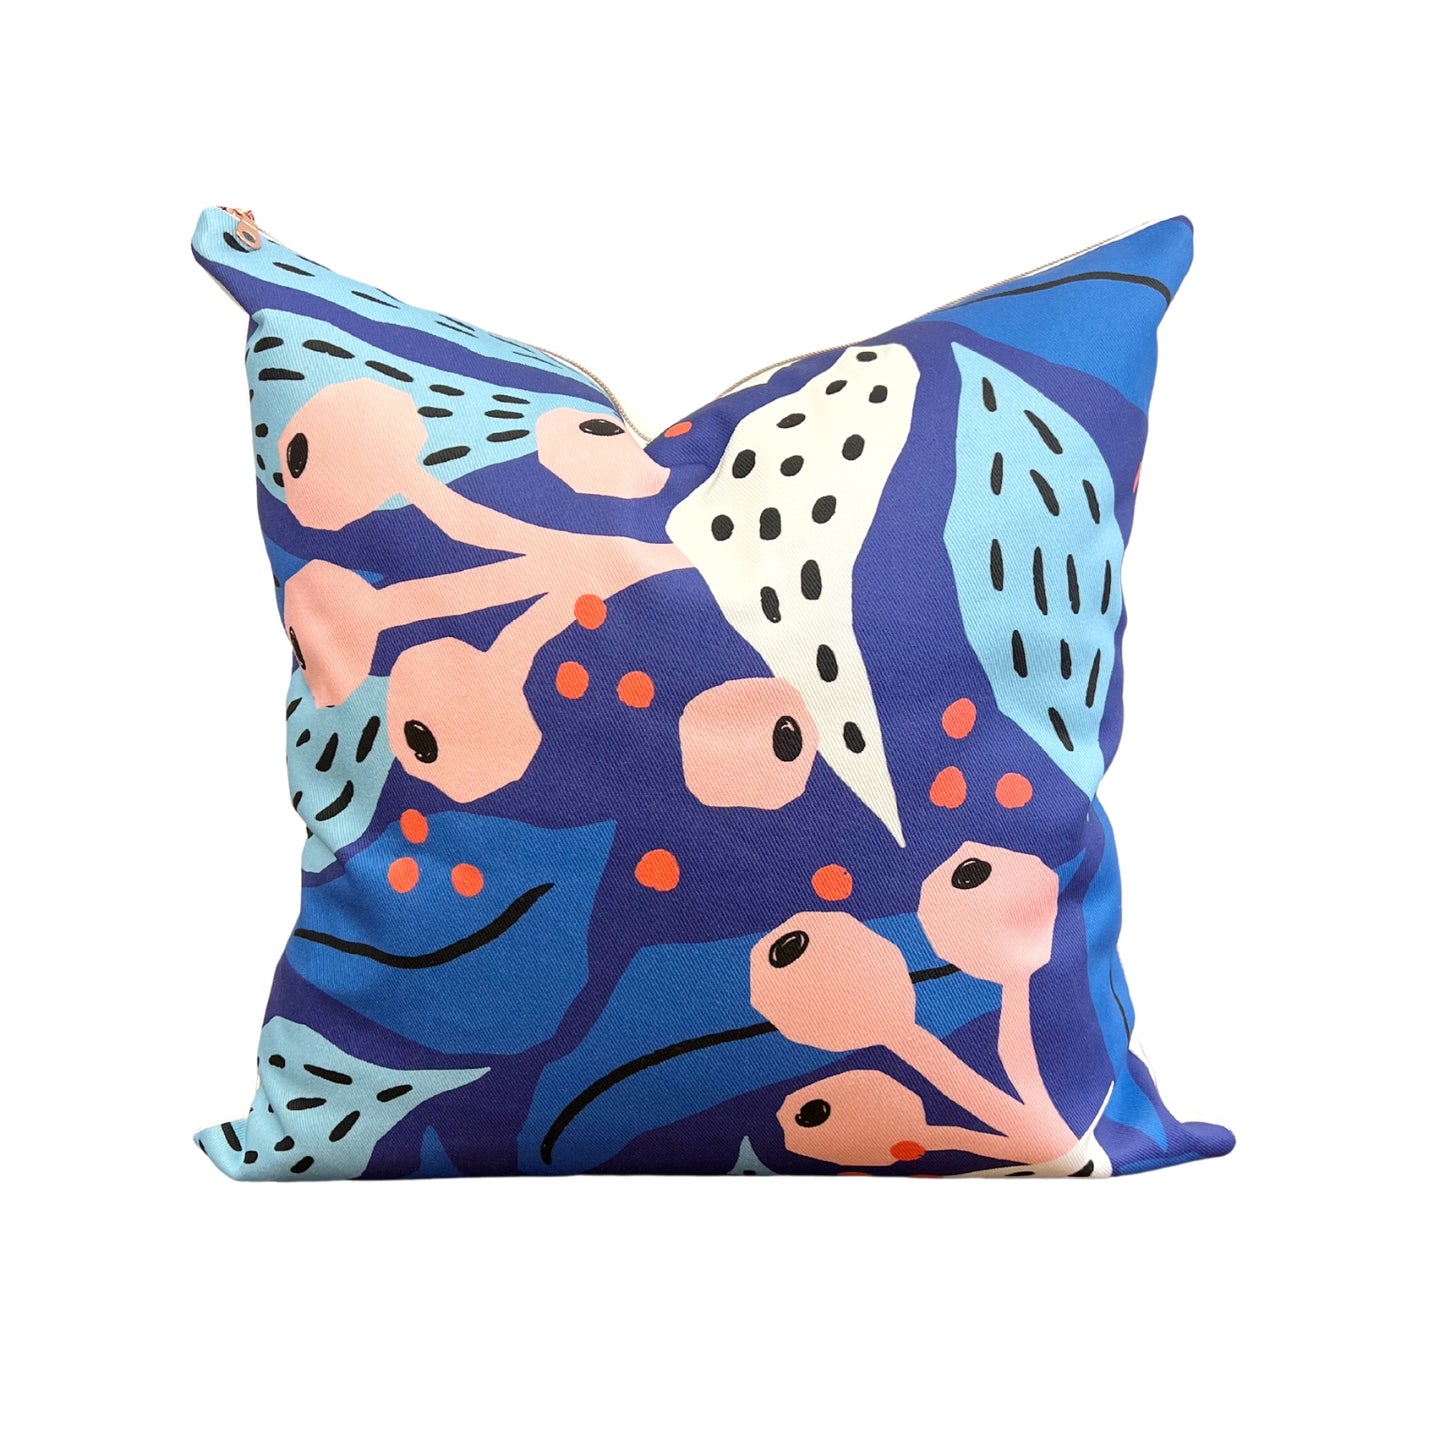 Papercut Collage Blue Pillow Cover